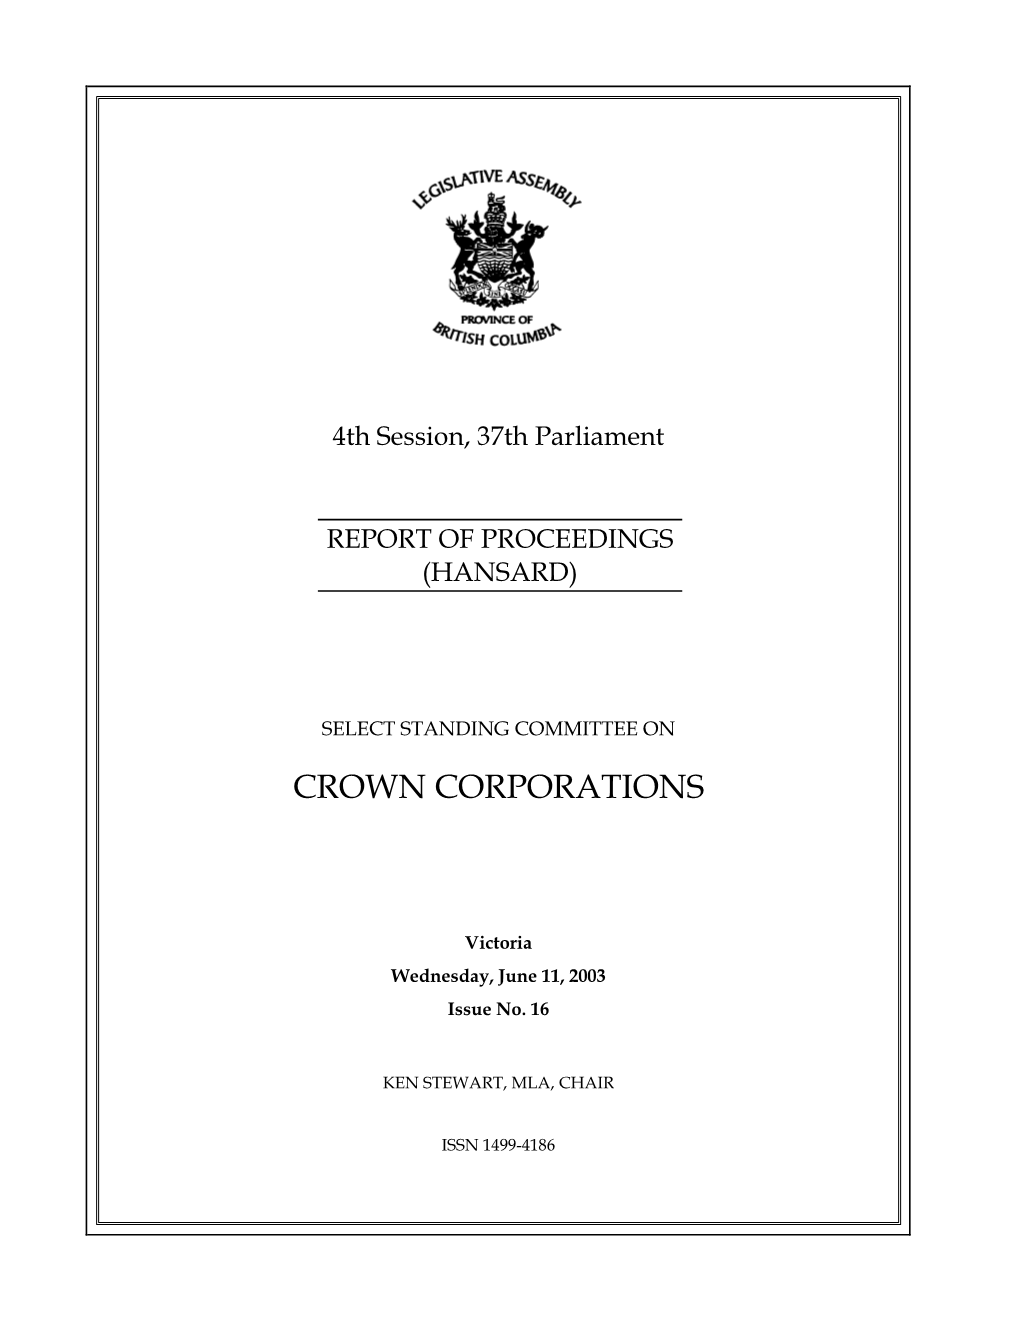 Crown Corporations -- Issue No. 16 -- Wednesday, June 11, 2003